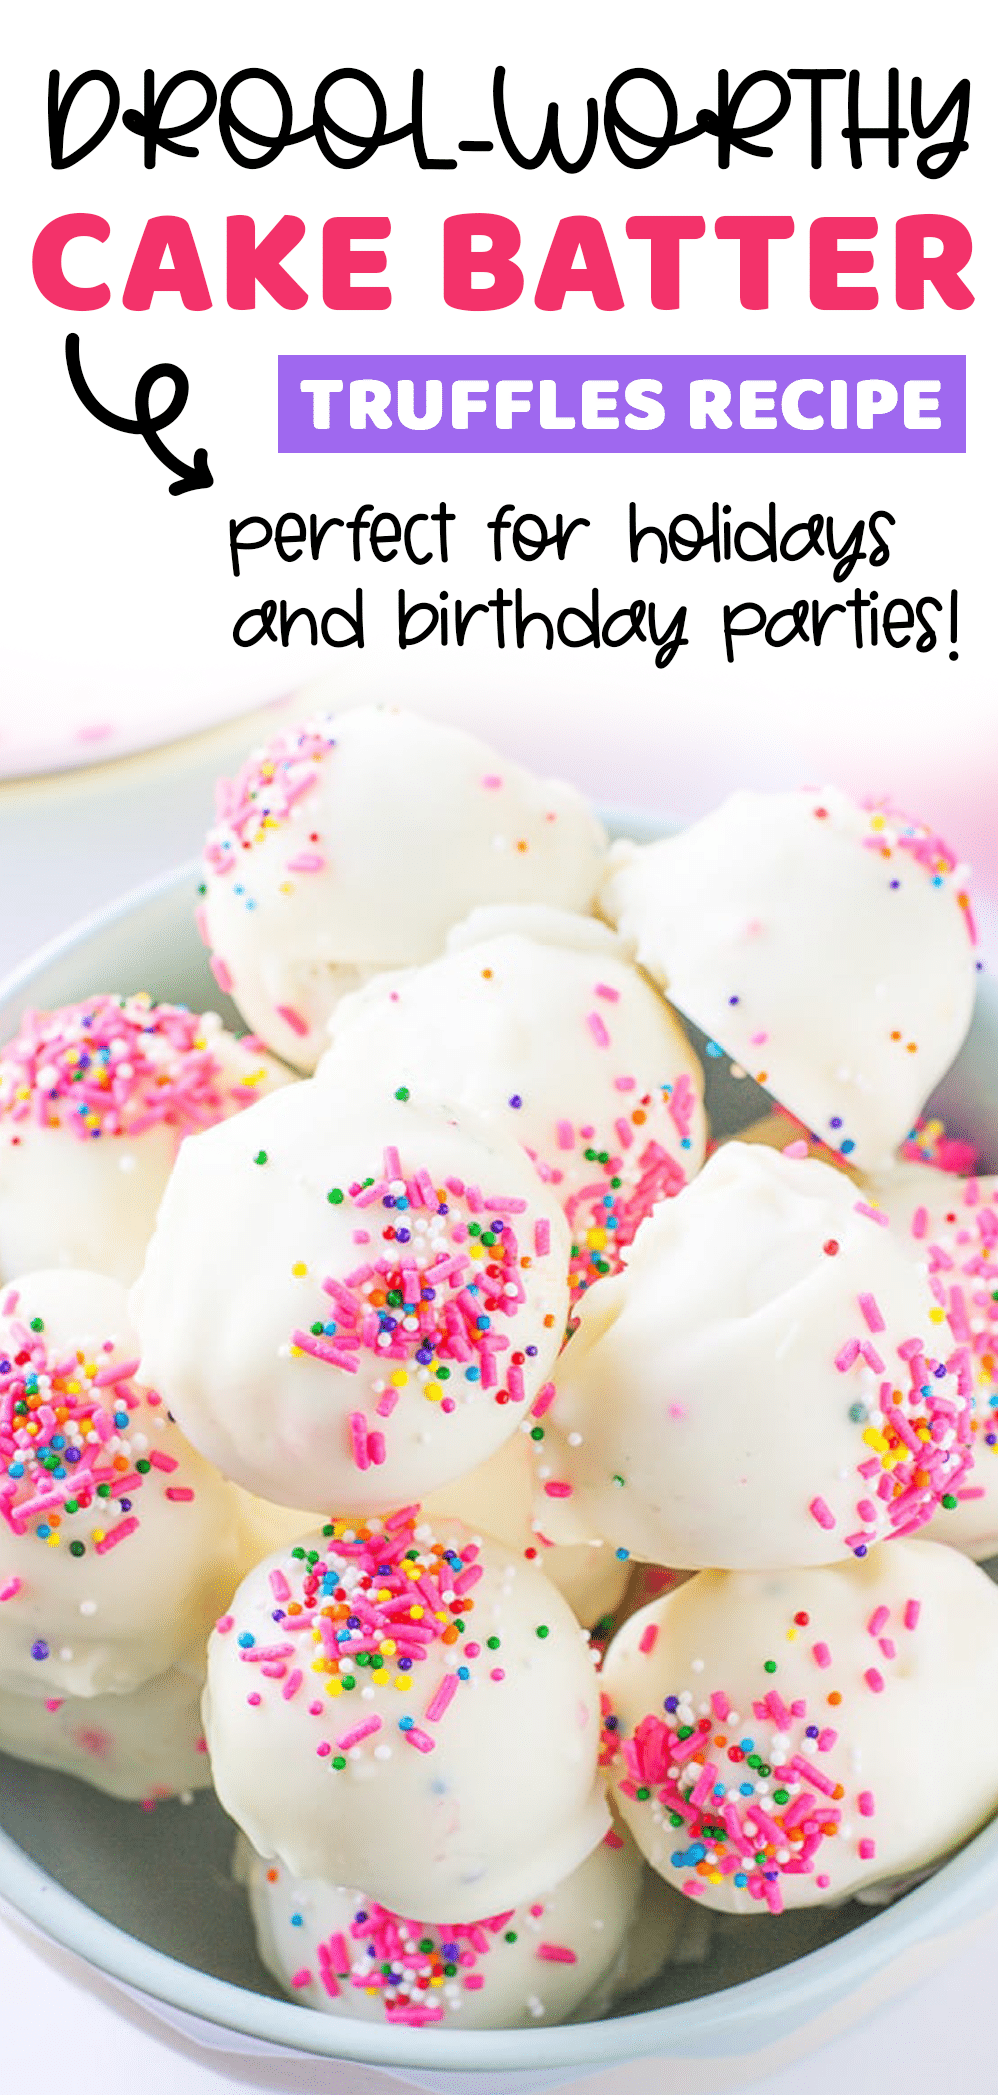 no bake cake batter truffles in a bowl with text that reads drool-worthy cake batter truffles recipe, perfect for holidays and birthday parties!